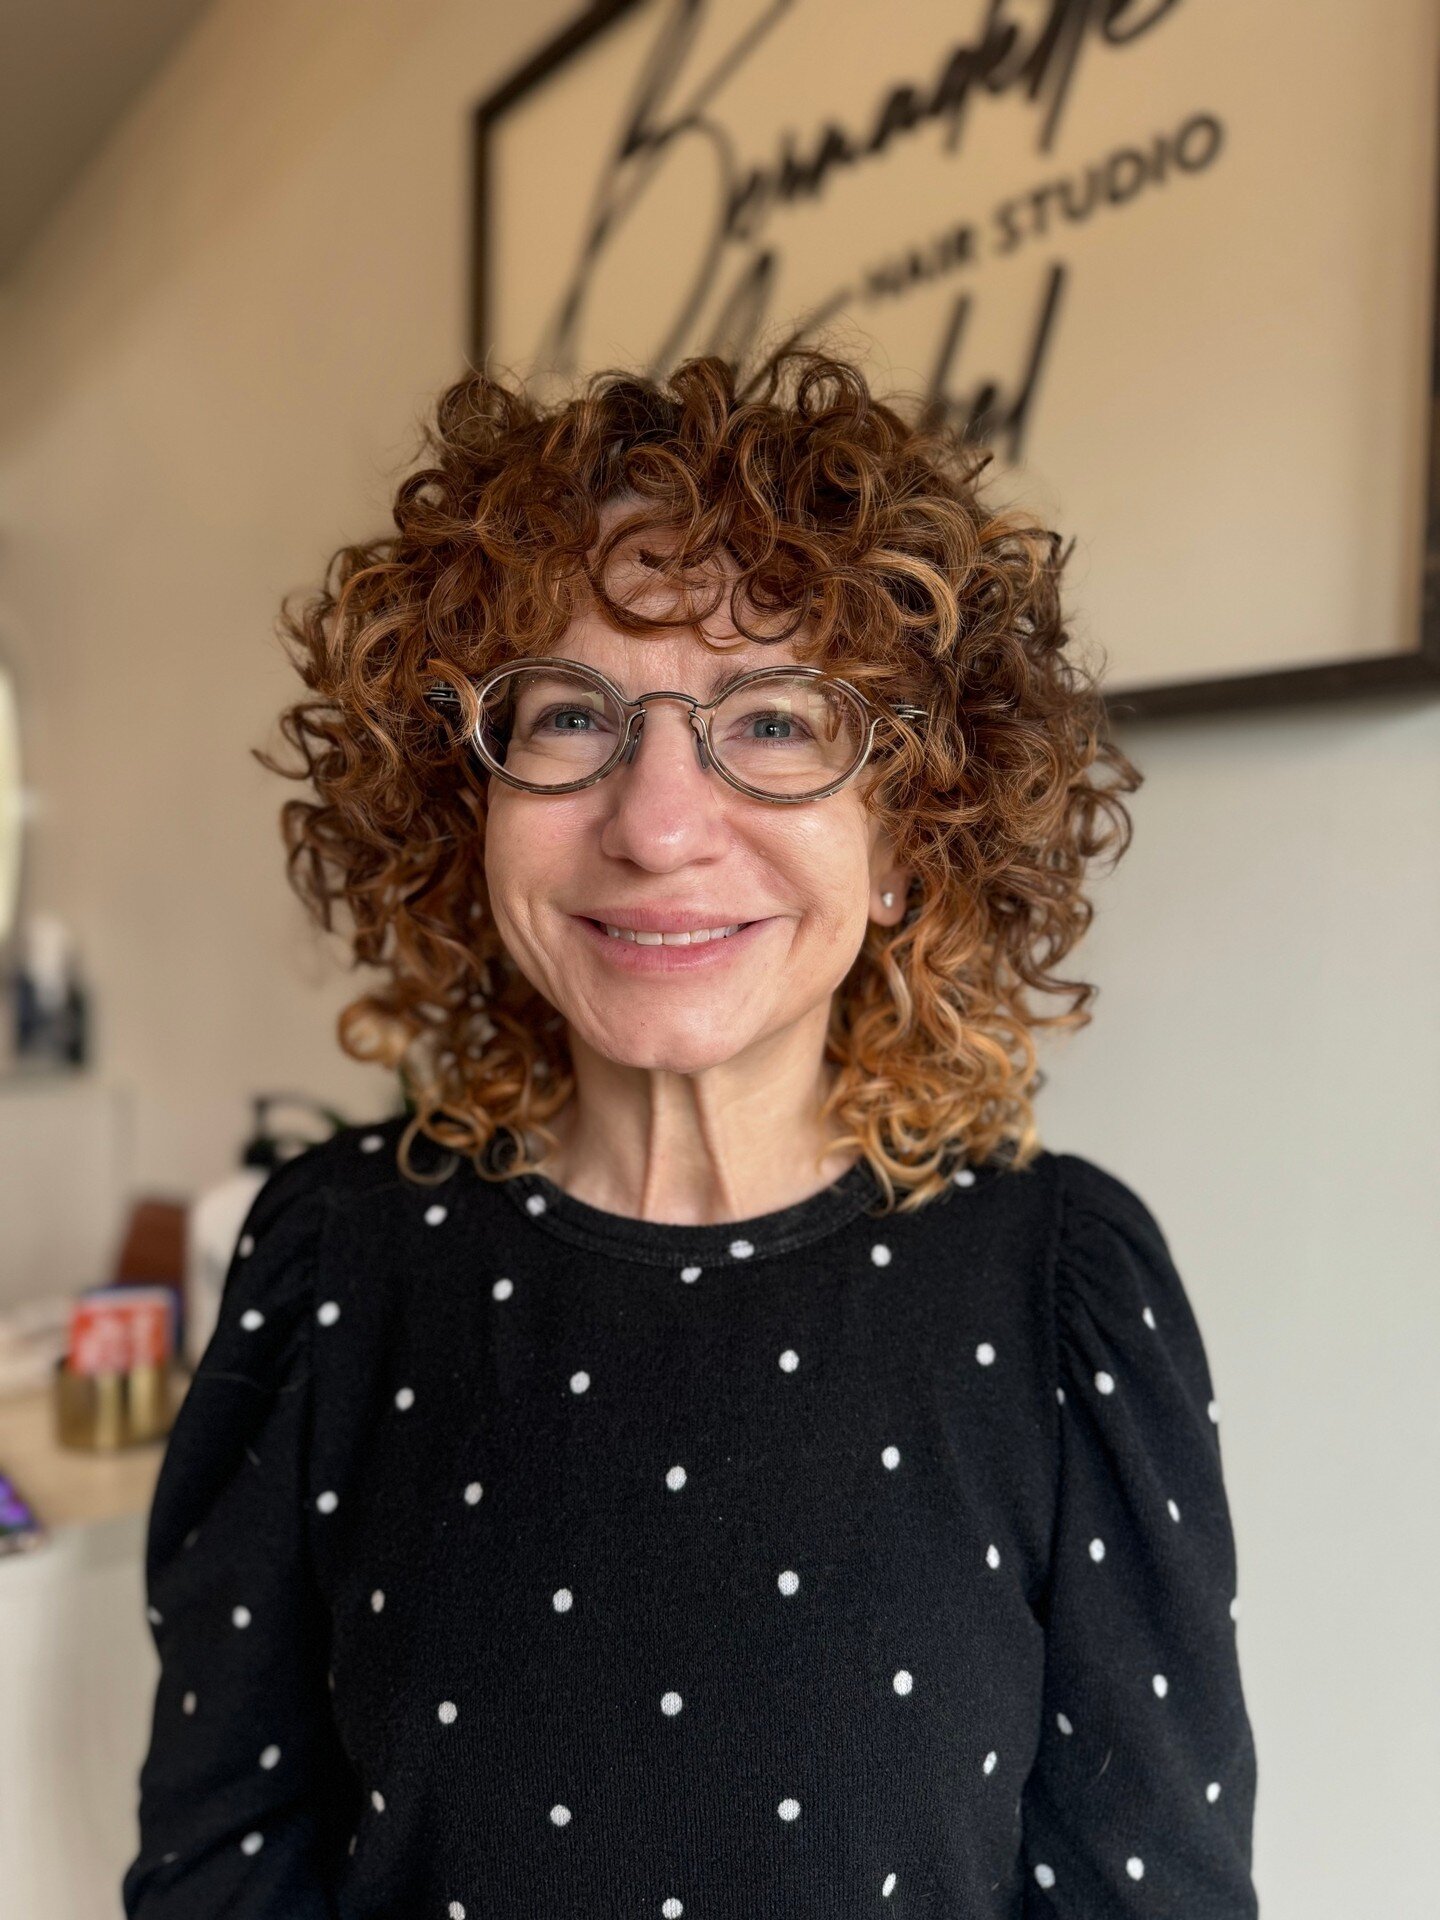 Curly hair dos and don&rsquo;ts! 

With all the curly hair information available, it can be super overwhelming.  Our guests are always asking us to help them determine what is best for their hair and lifestyle. 

Allow us to take away that overwhelm.